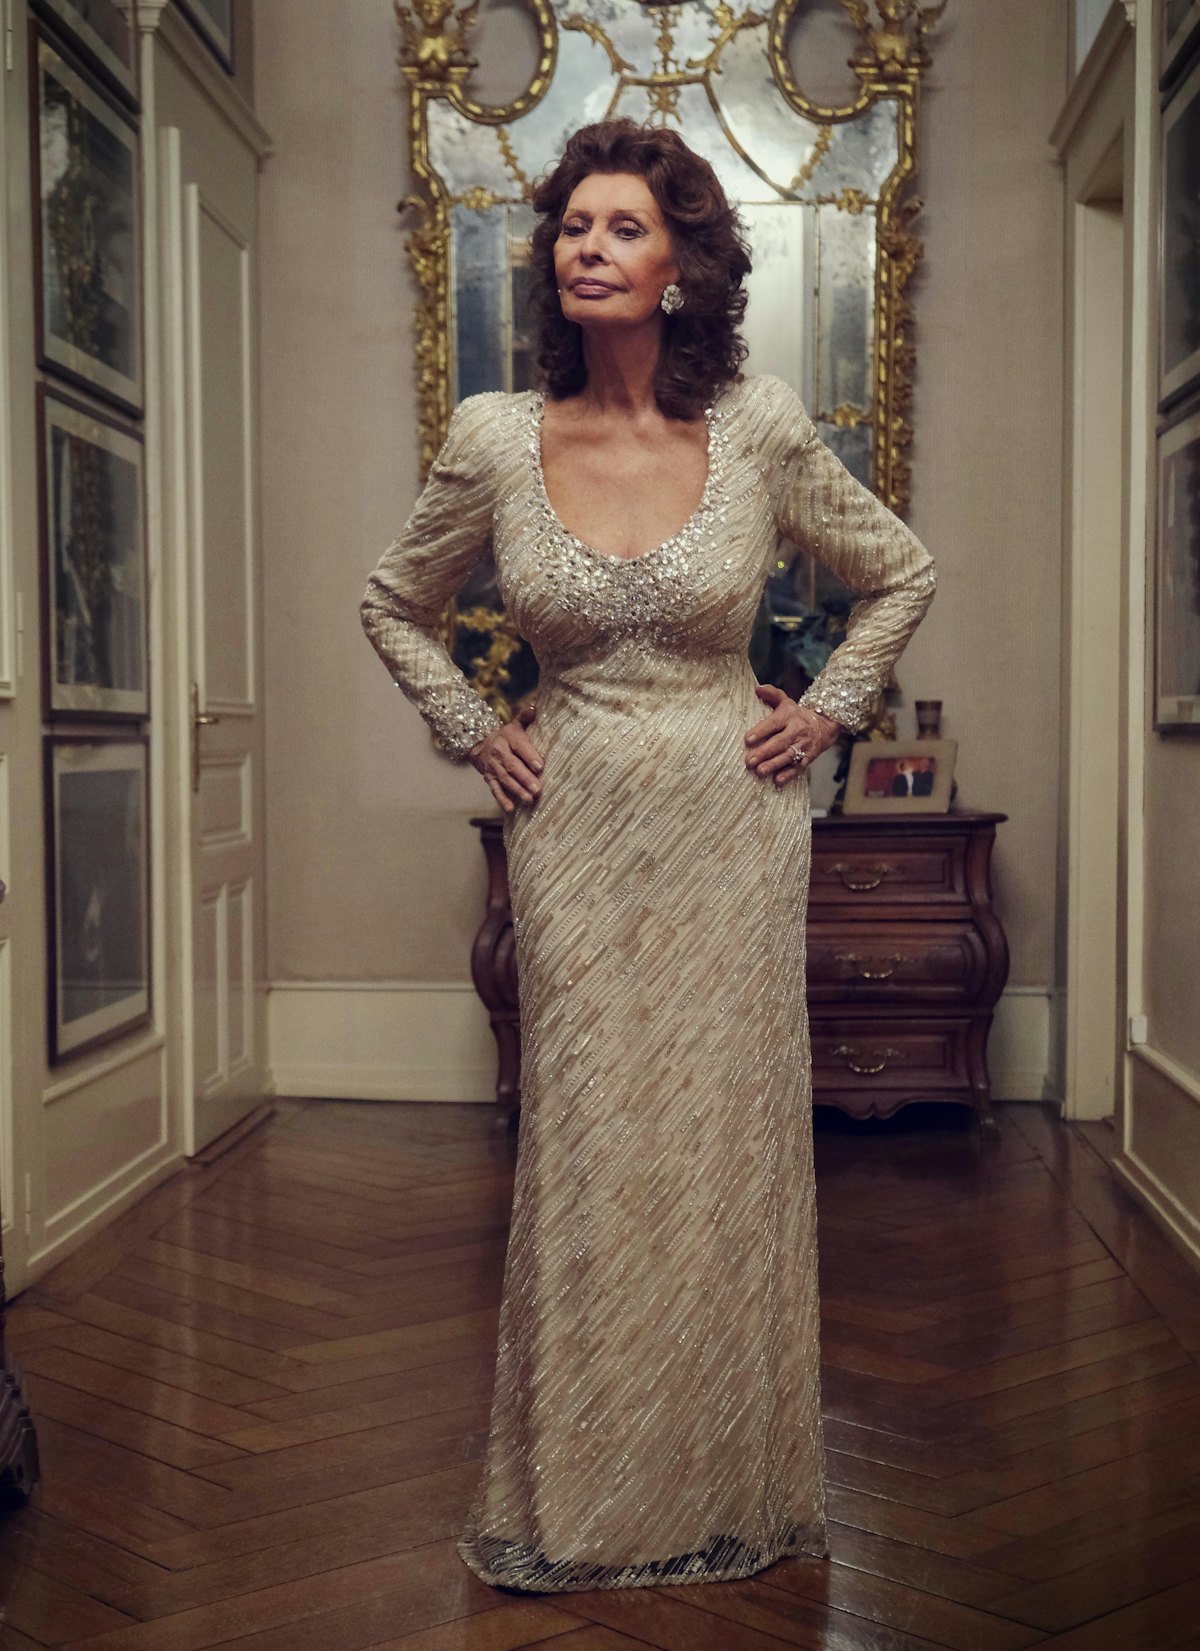 Sophia Loren On The Life Ahead And Returning To The Screen At 86